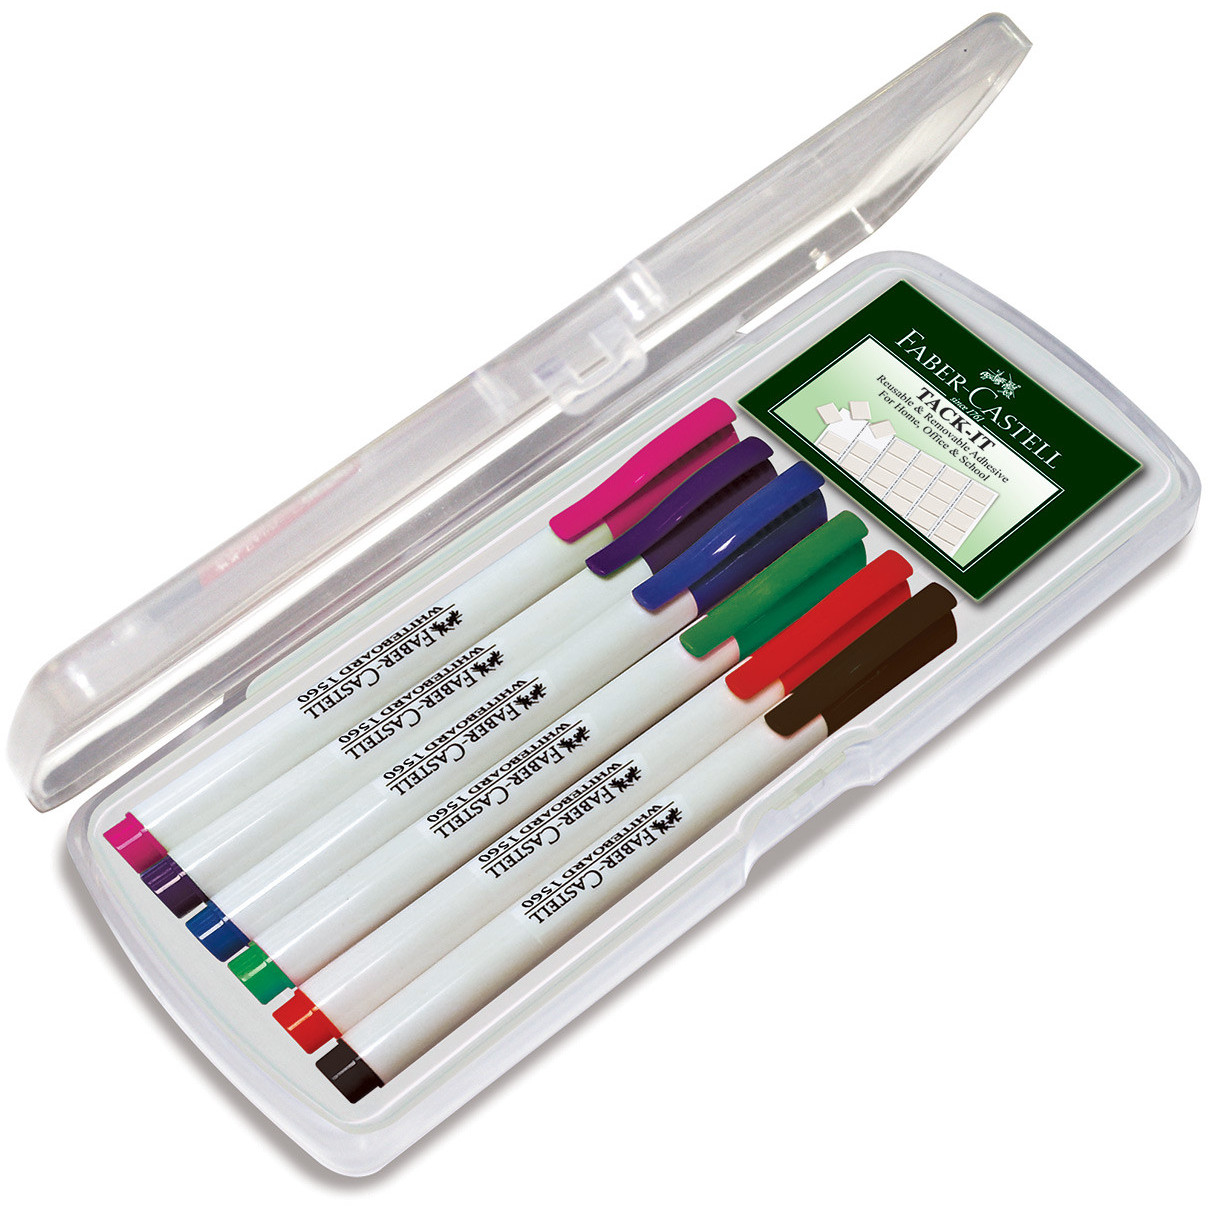 https://www.theonlinepencompany.com/cache/1210/faber-castell/whiteboard-1560/156077-2.jpg